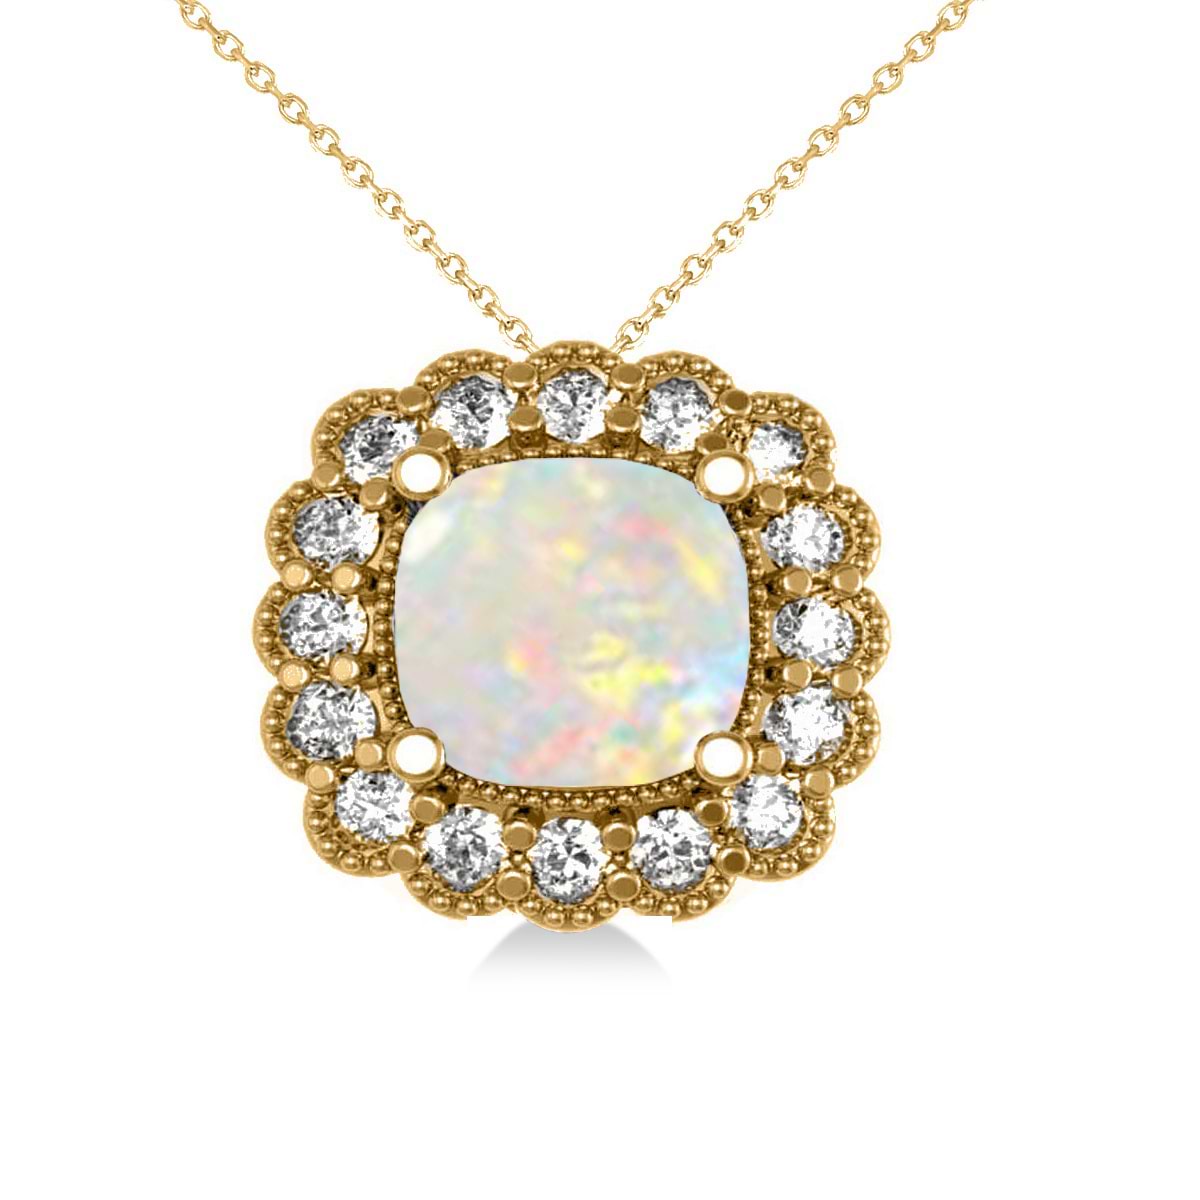 Opal & Diamond Floral Cushion Pendant Necklace 14k Yellow Gold (1.68ct)